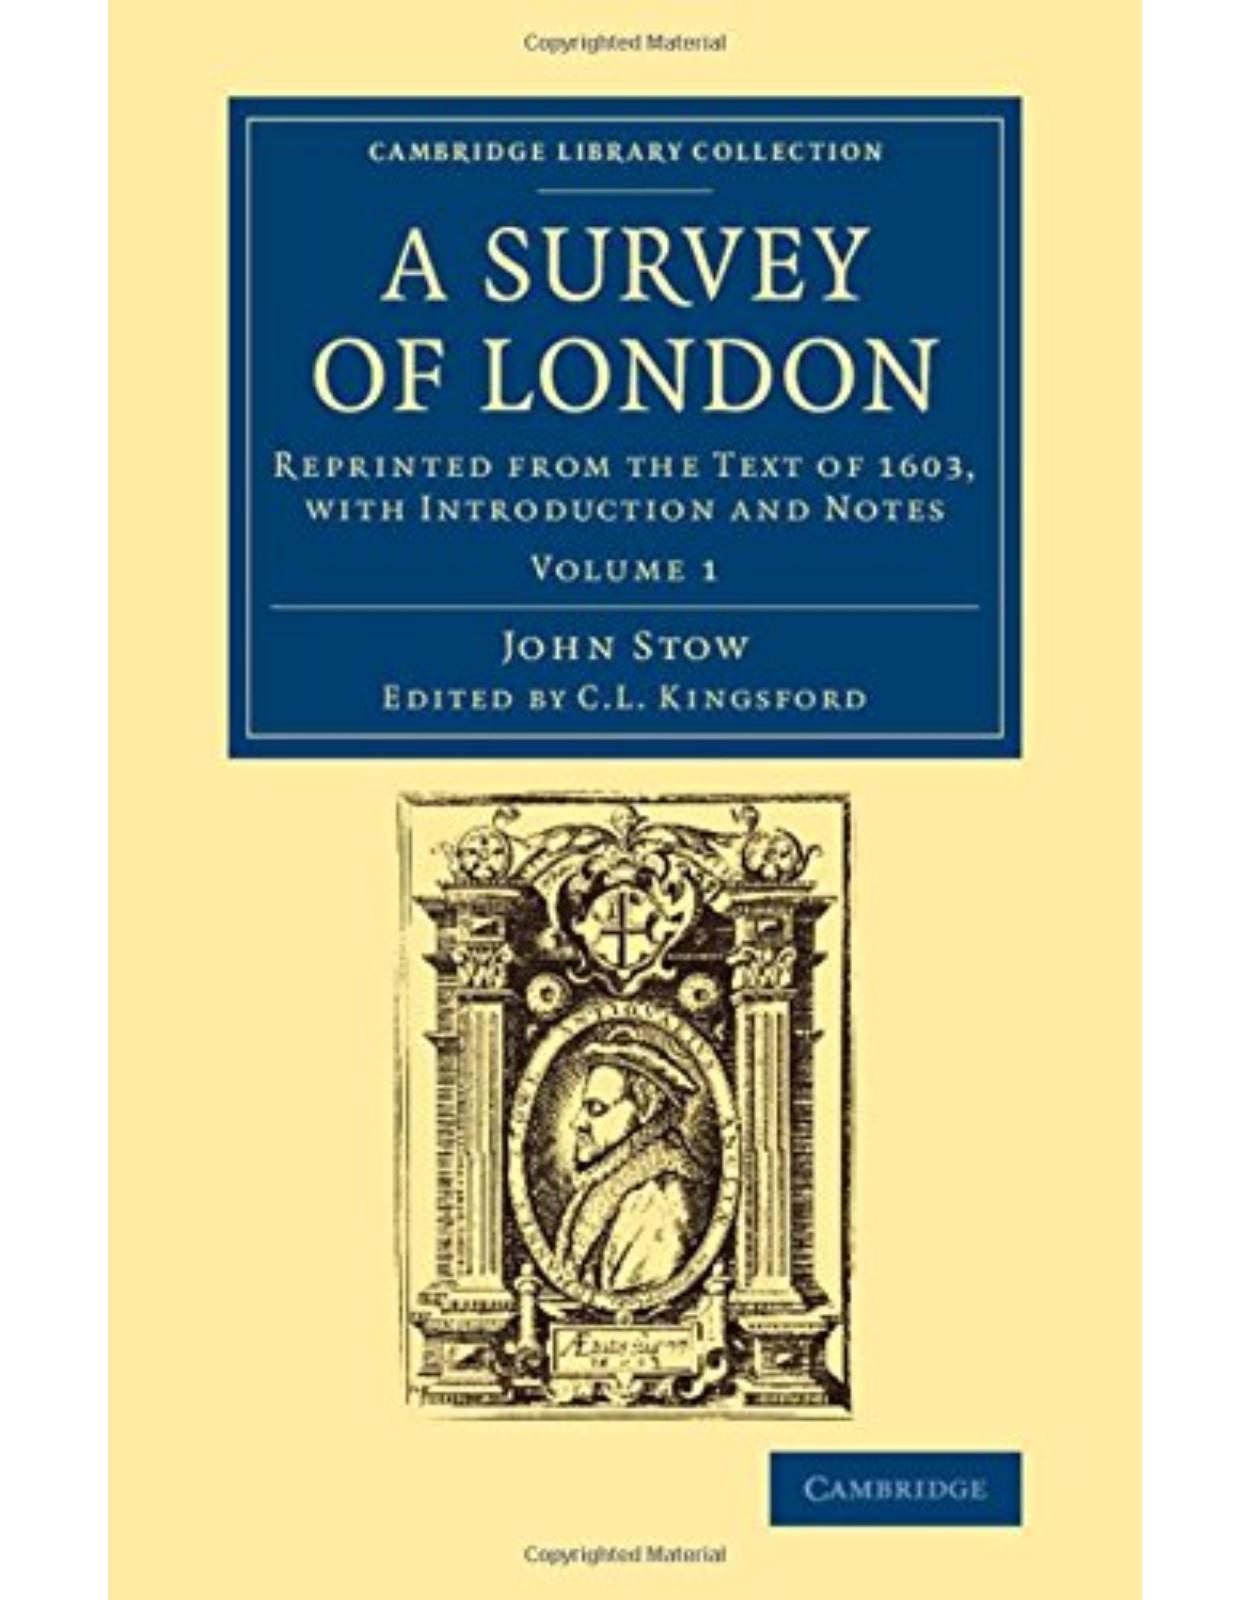 A Survey of London: Reprinted from the Text of 1603, with Introduction and Notes (Volume 1)